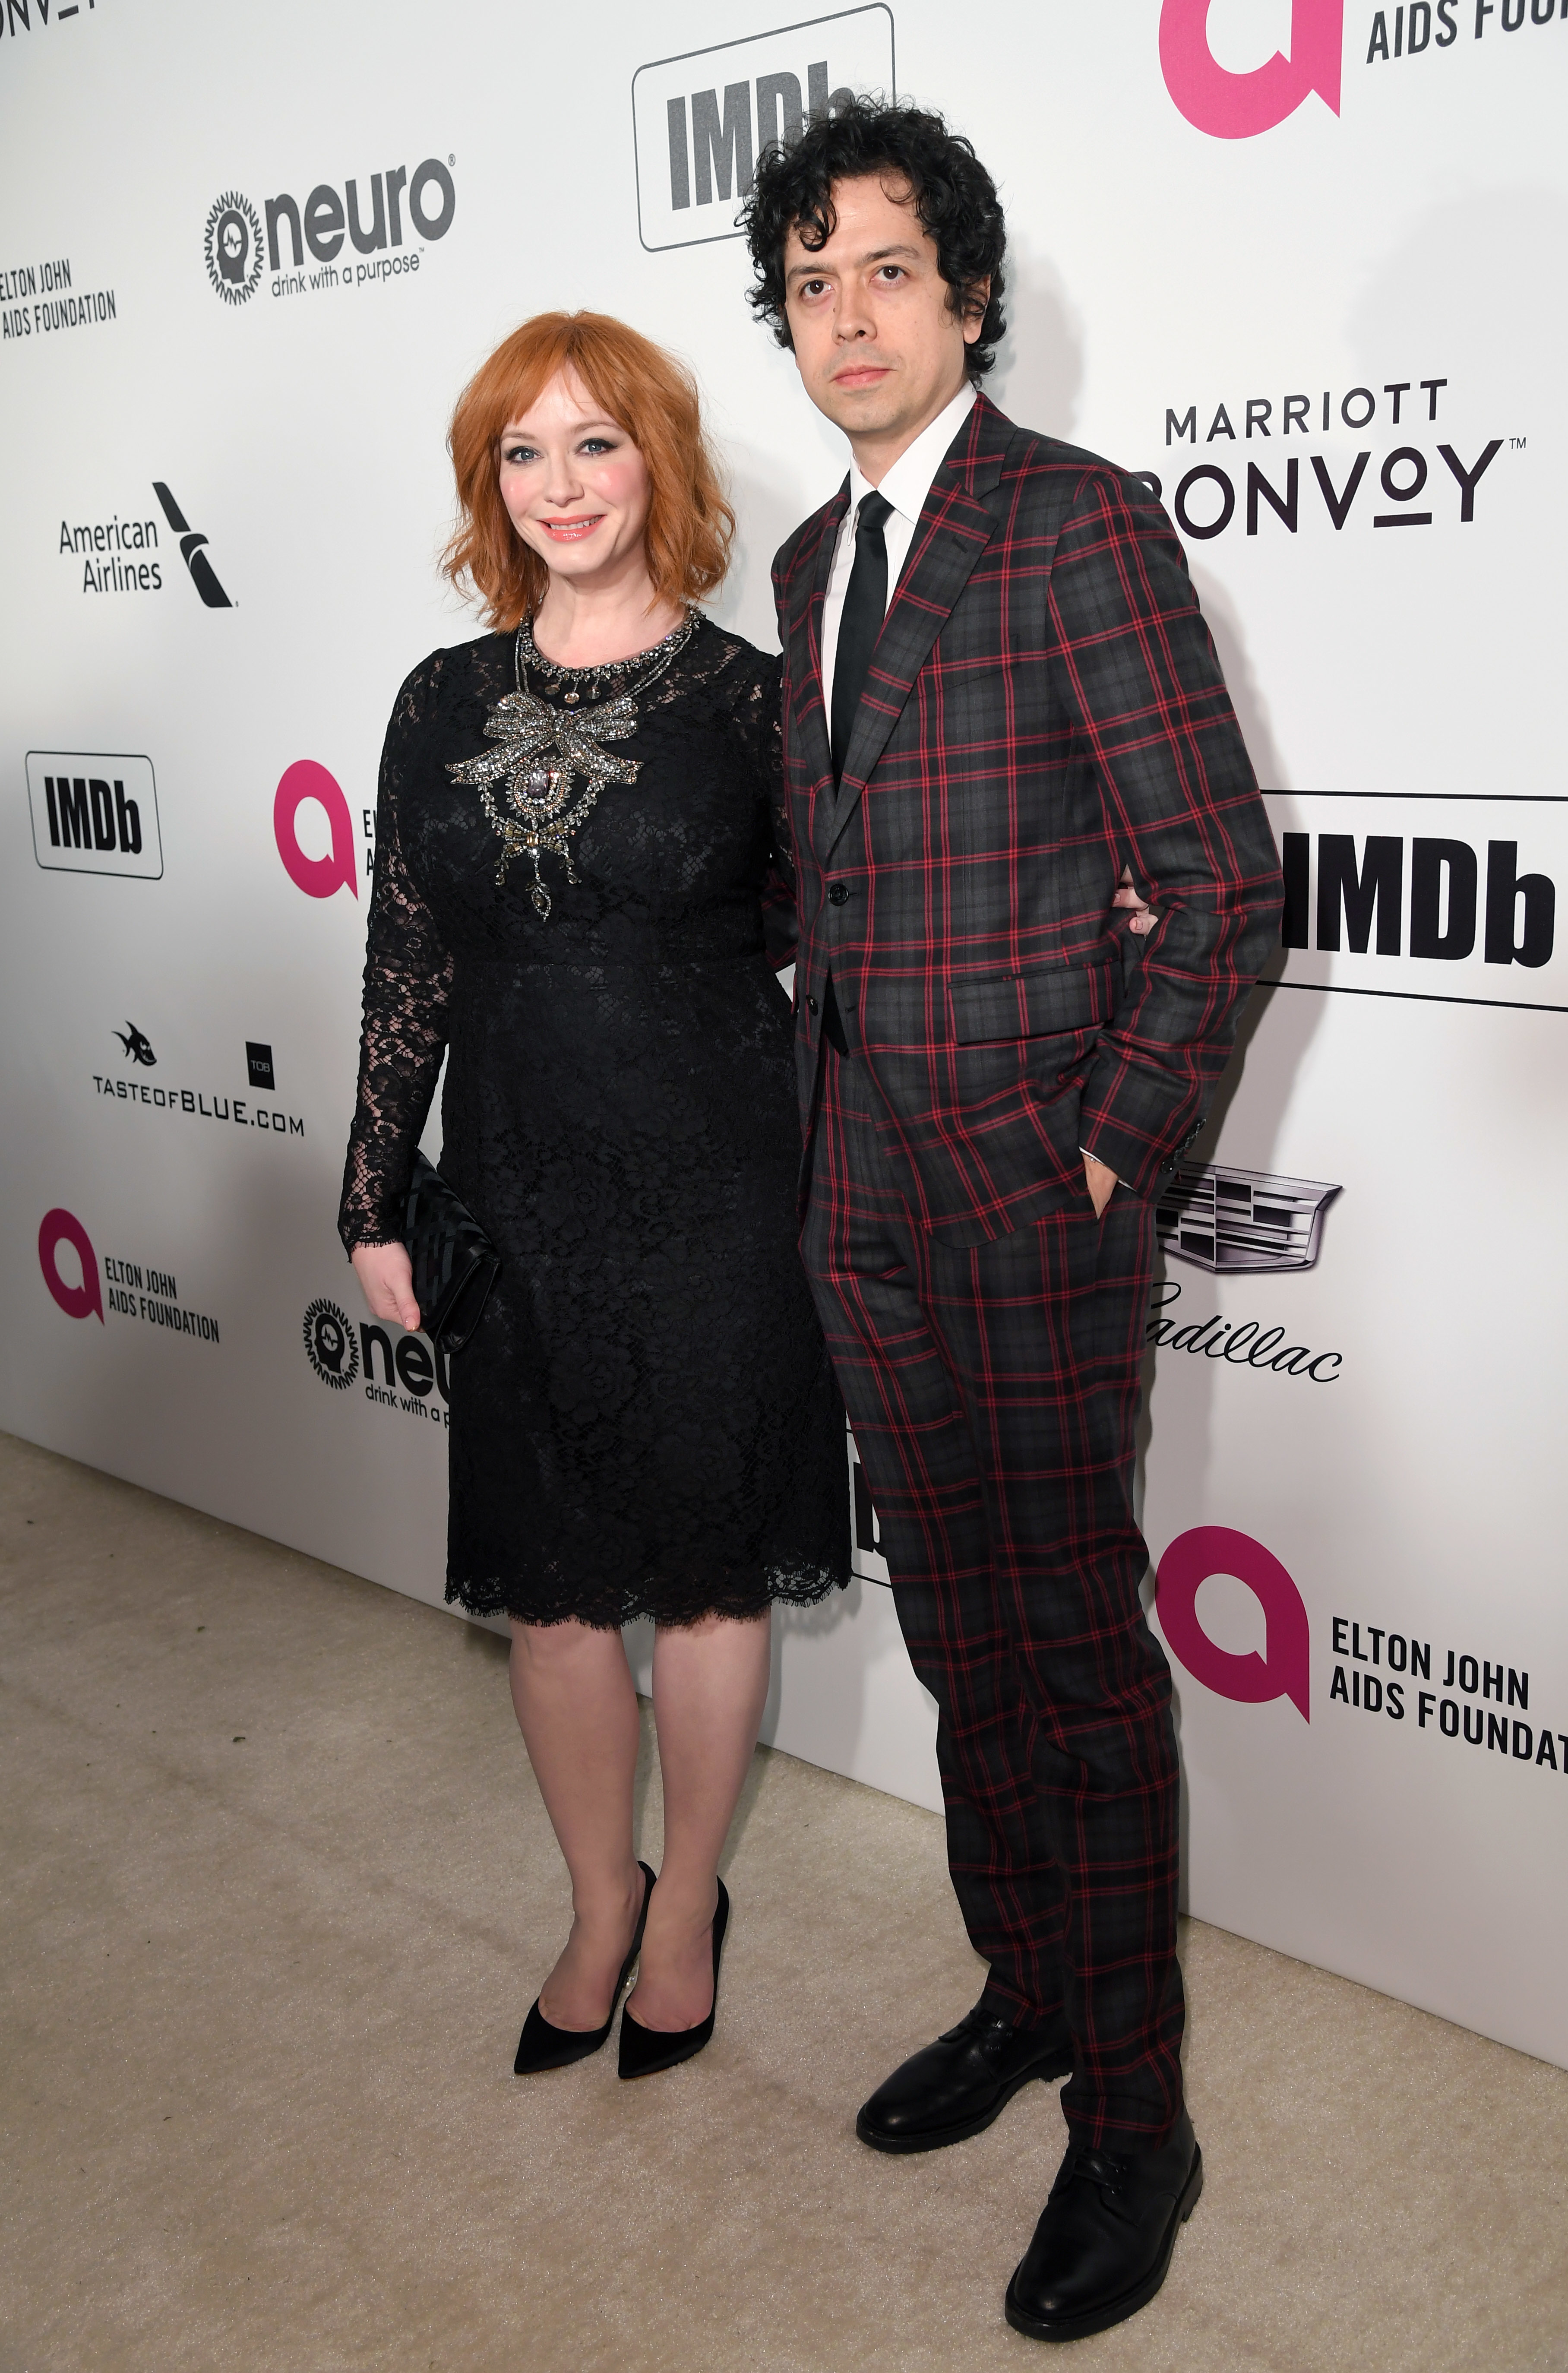 Two people pose together; person on left in a black lace dress and right in a plaid suit